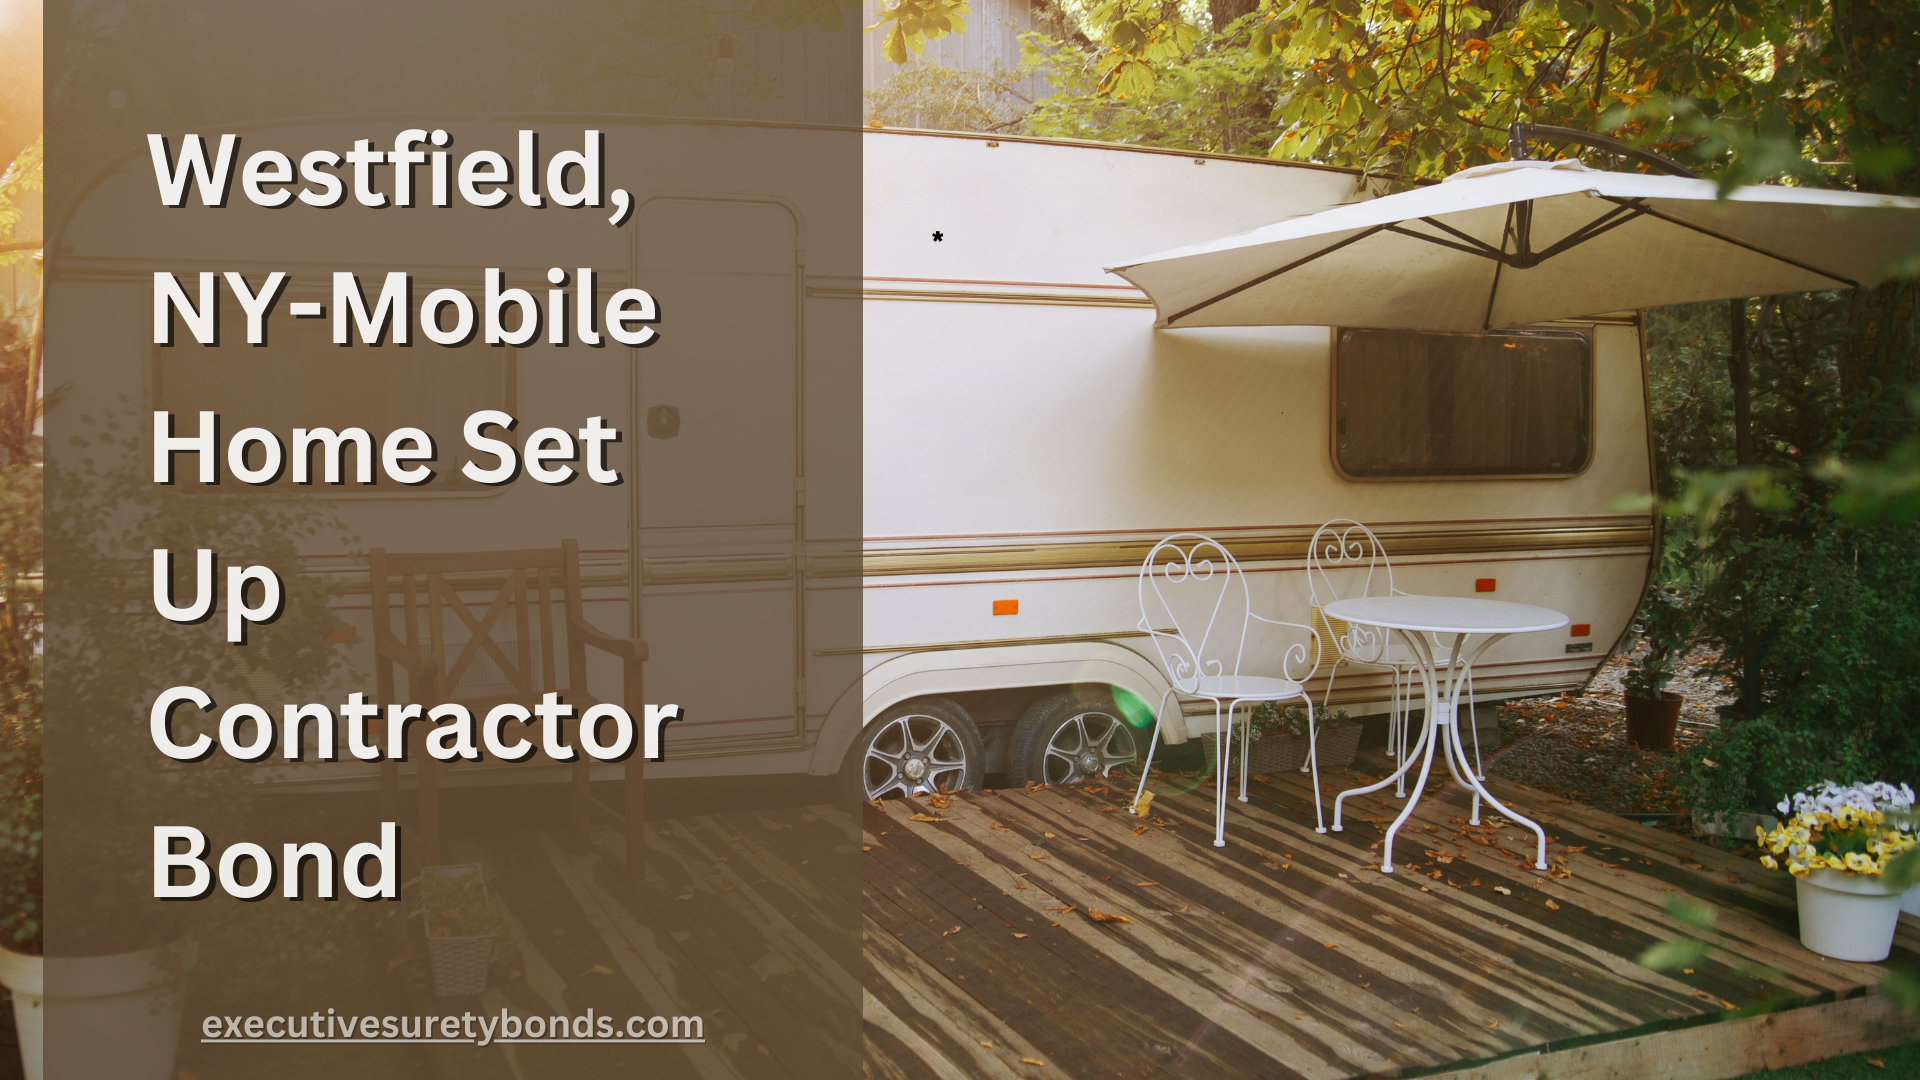 Westfield, NY-Mobile Home Set Up Contractor Bond